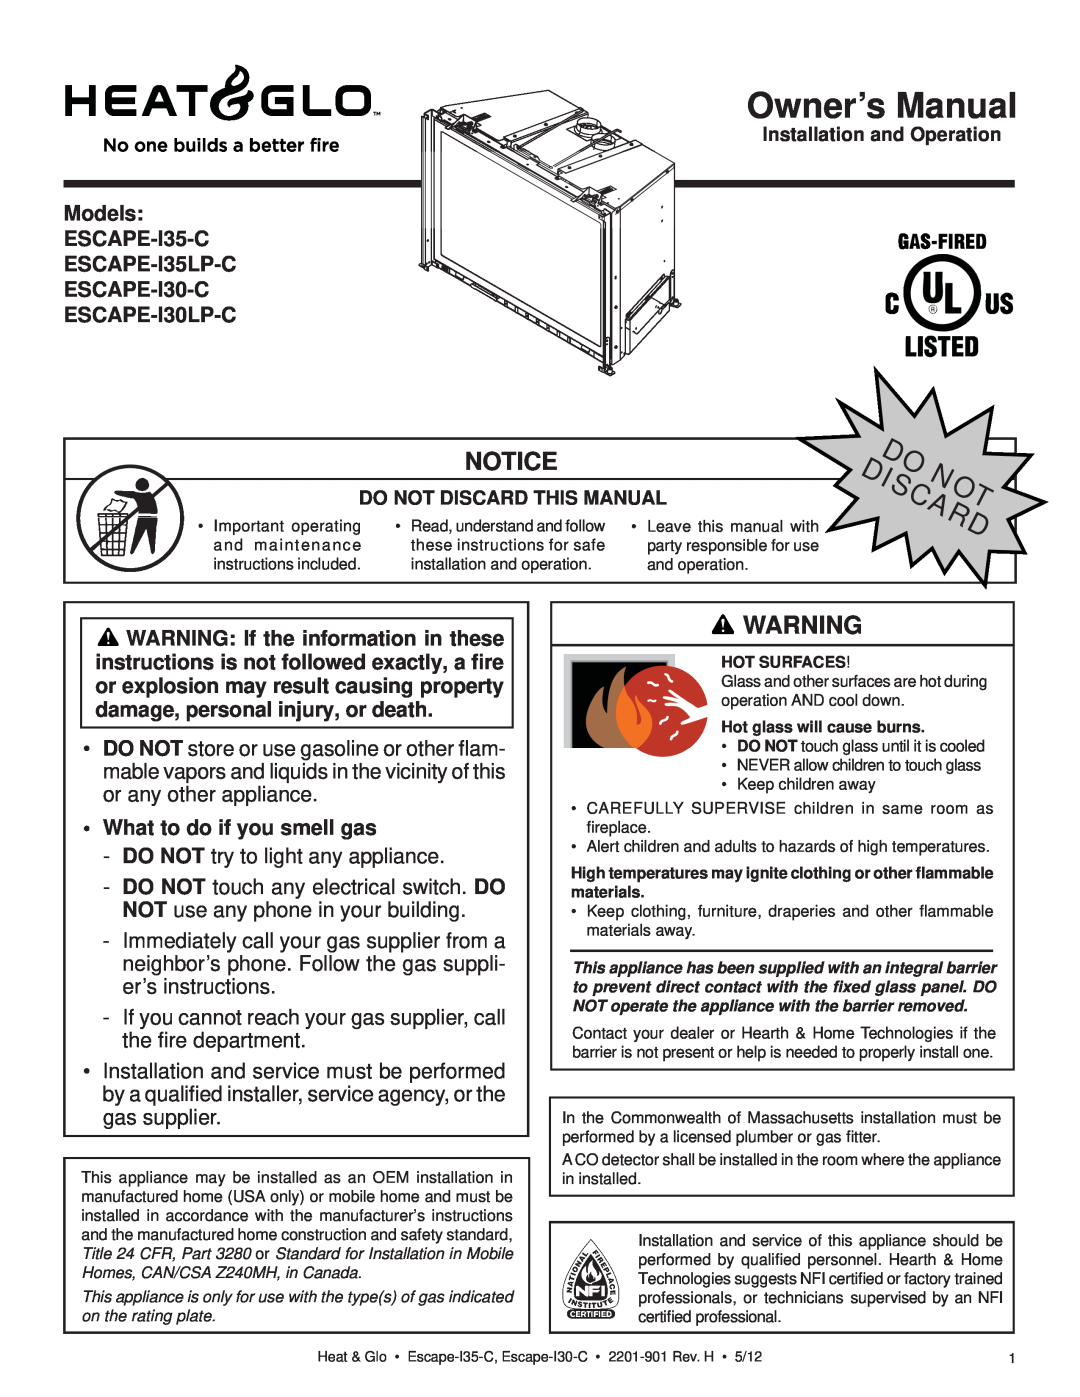 Heat & Glo LifeStyle ESCAPE-I35-C owner manual Notice, •What to do if you smell gas, Owner’s Manual 